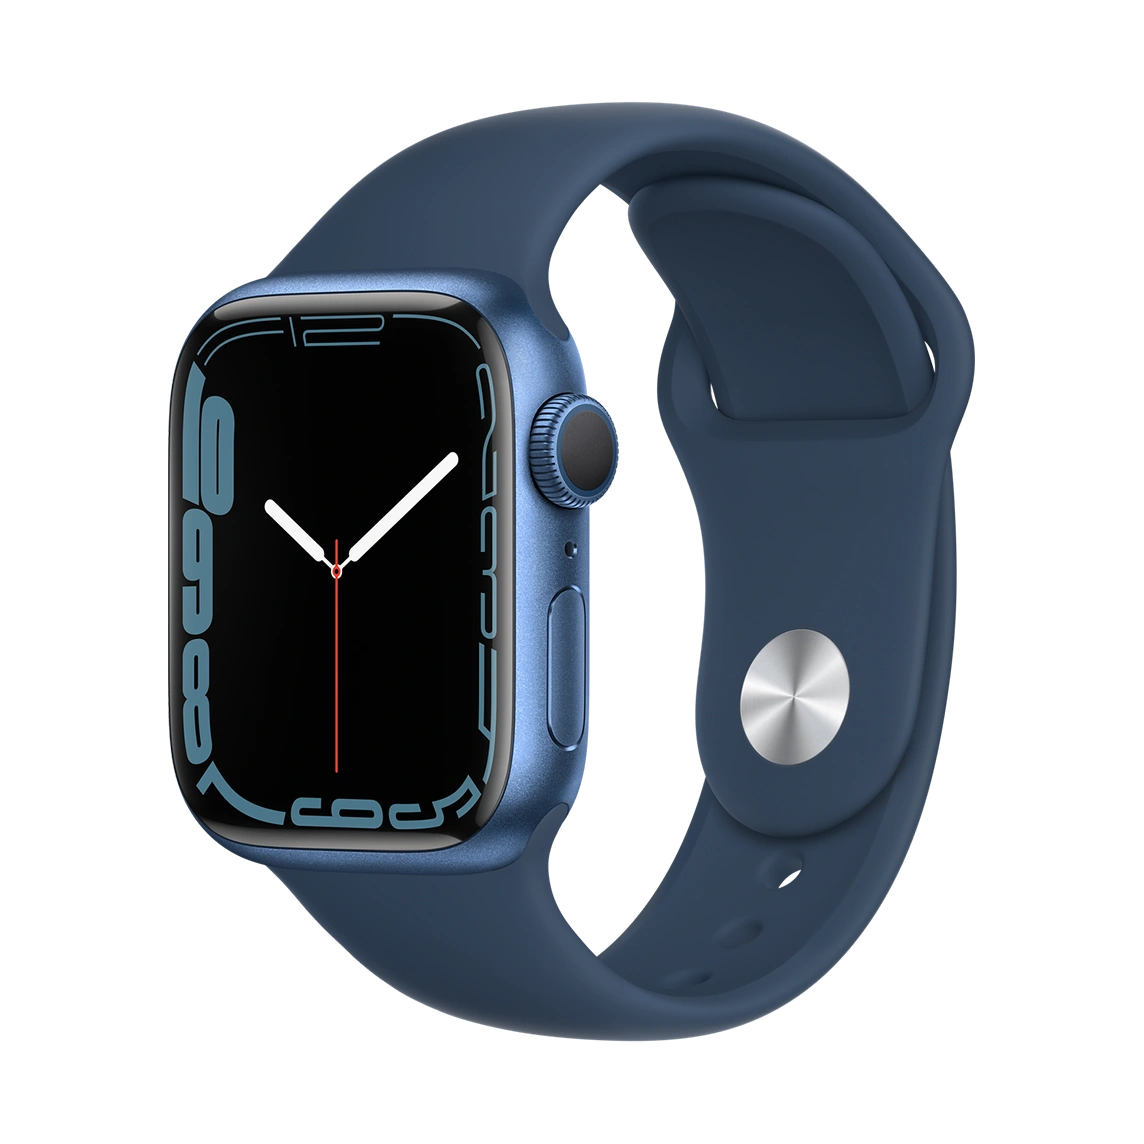 Apple Watch Series 7 Blue Aluminum Case with Abyss Blue Silicone Band